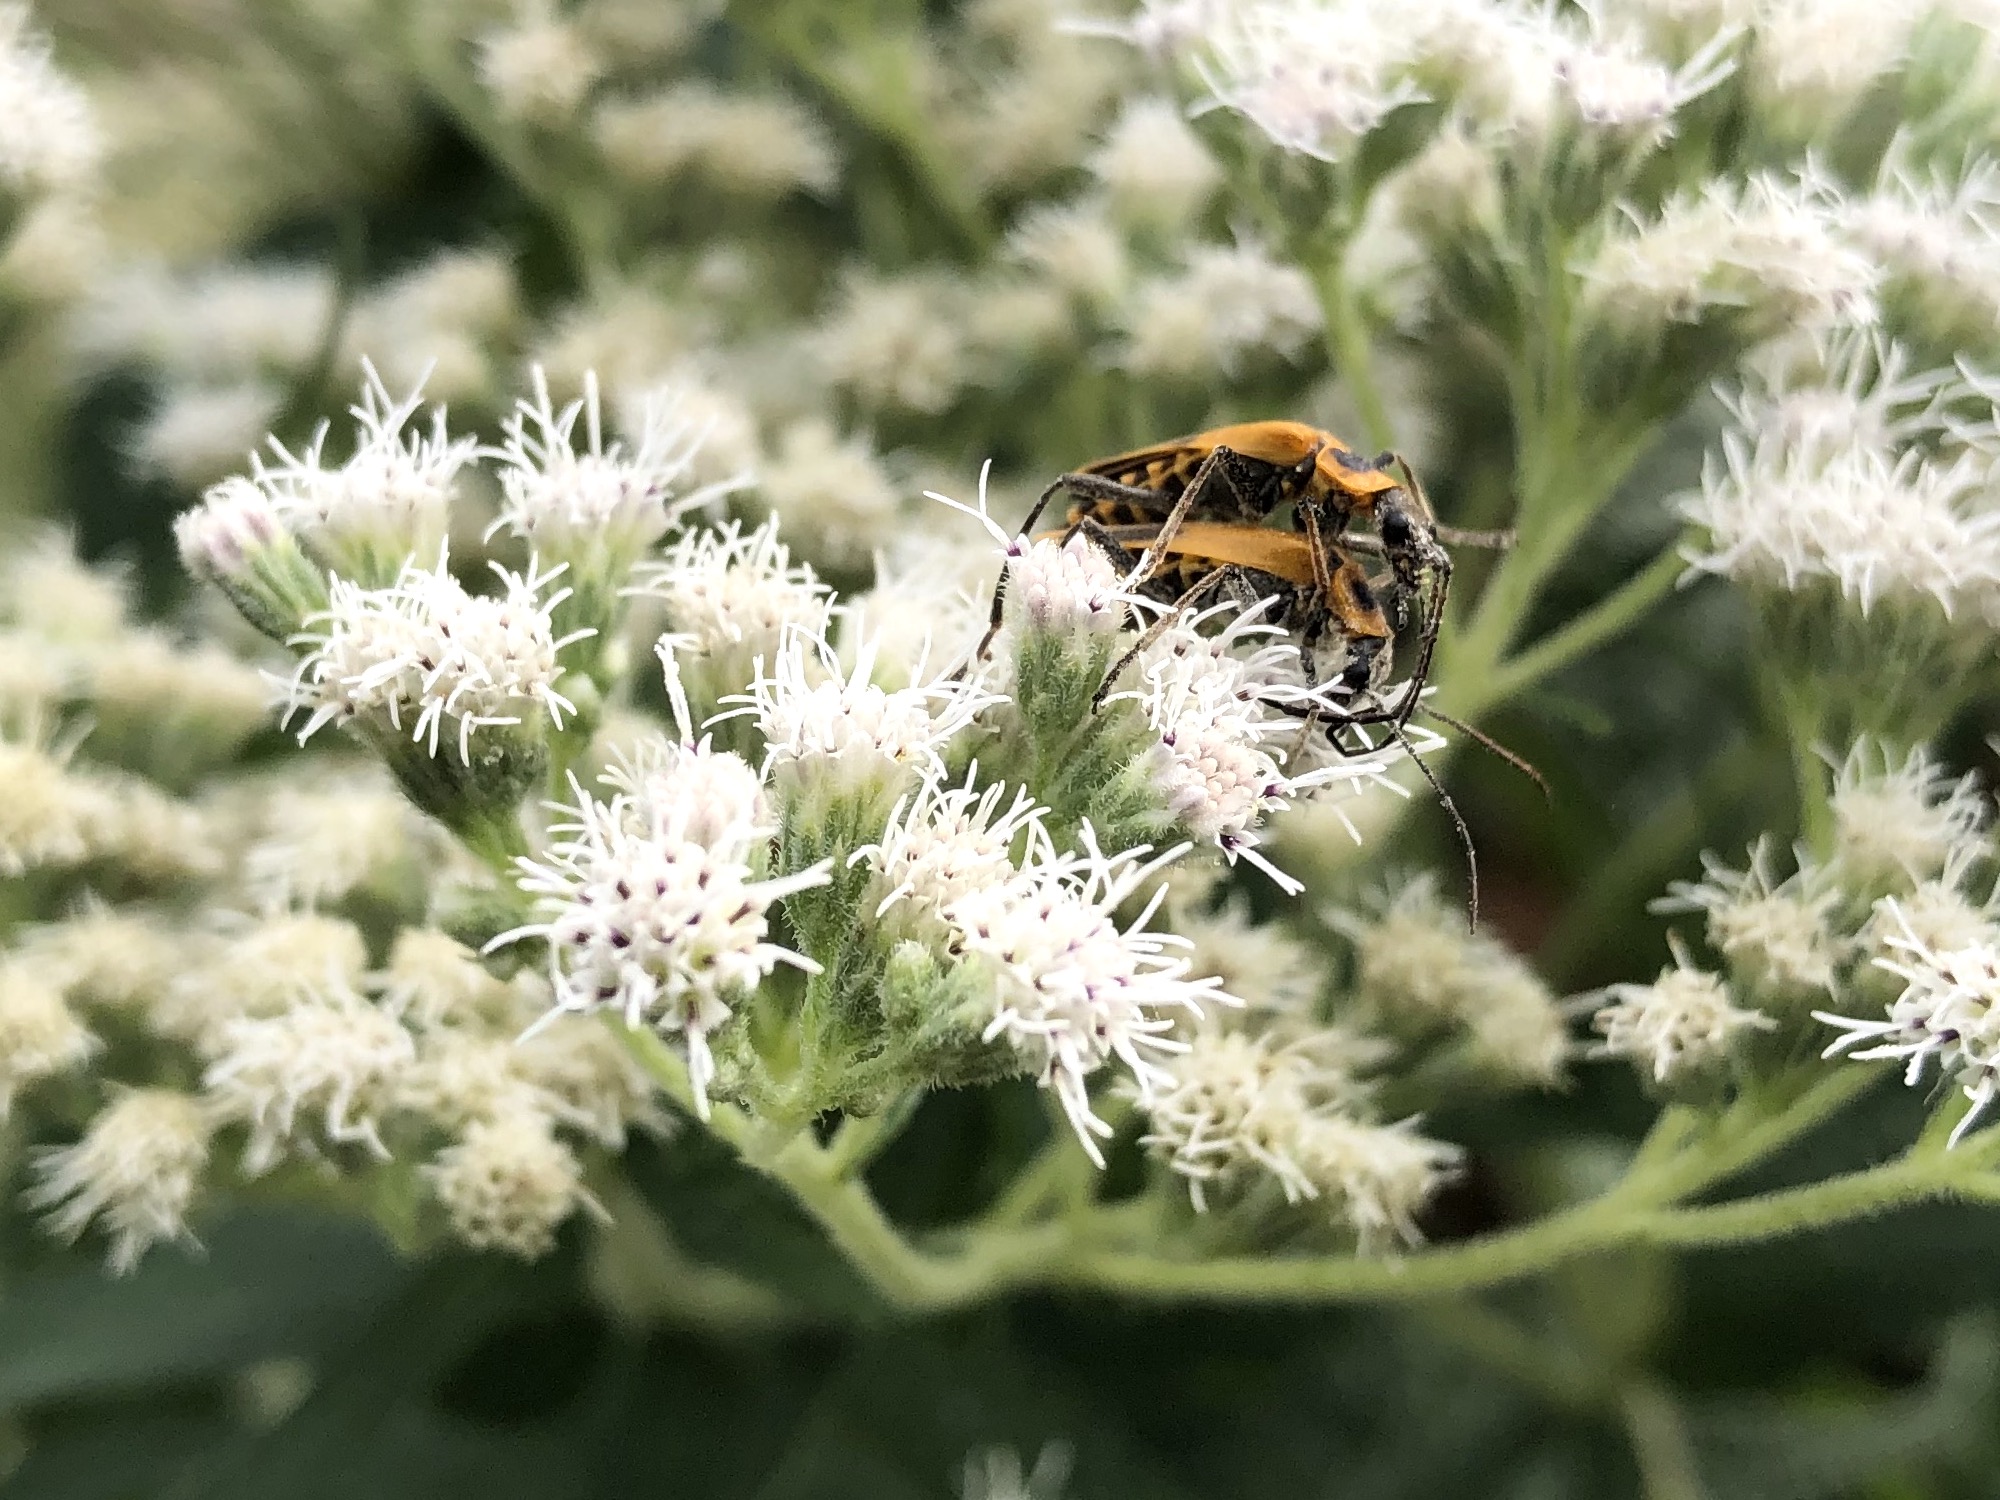 Common Boneset with Goldenrod Soldier Beetles near the stone entrance to the UW Arboretum on Seminole Road on September 2, 2021.